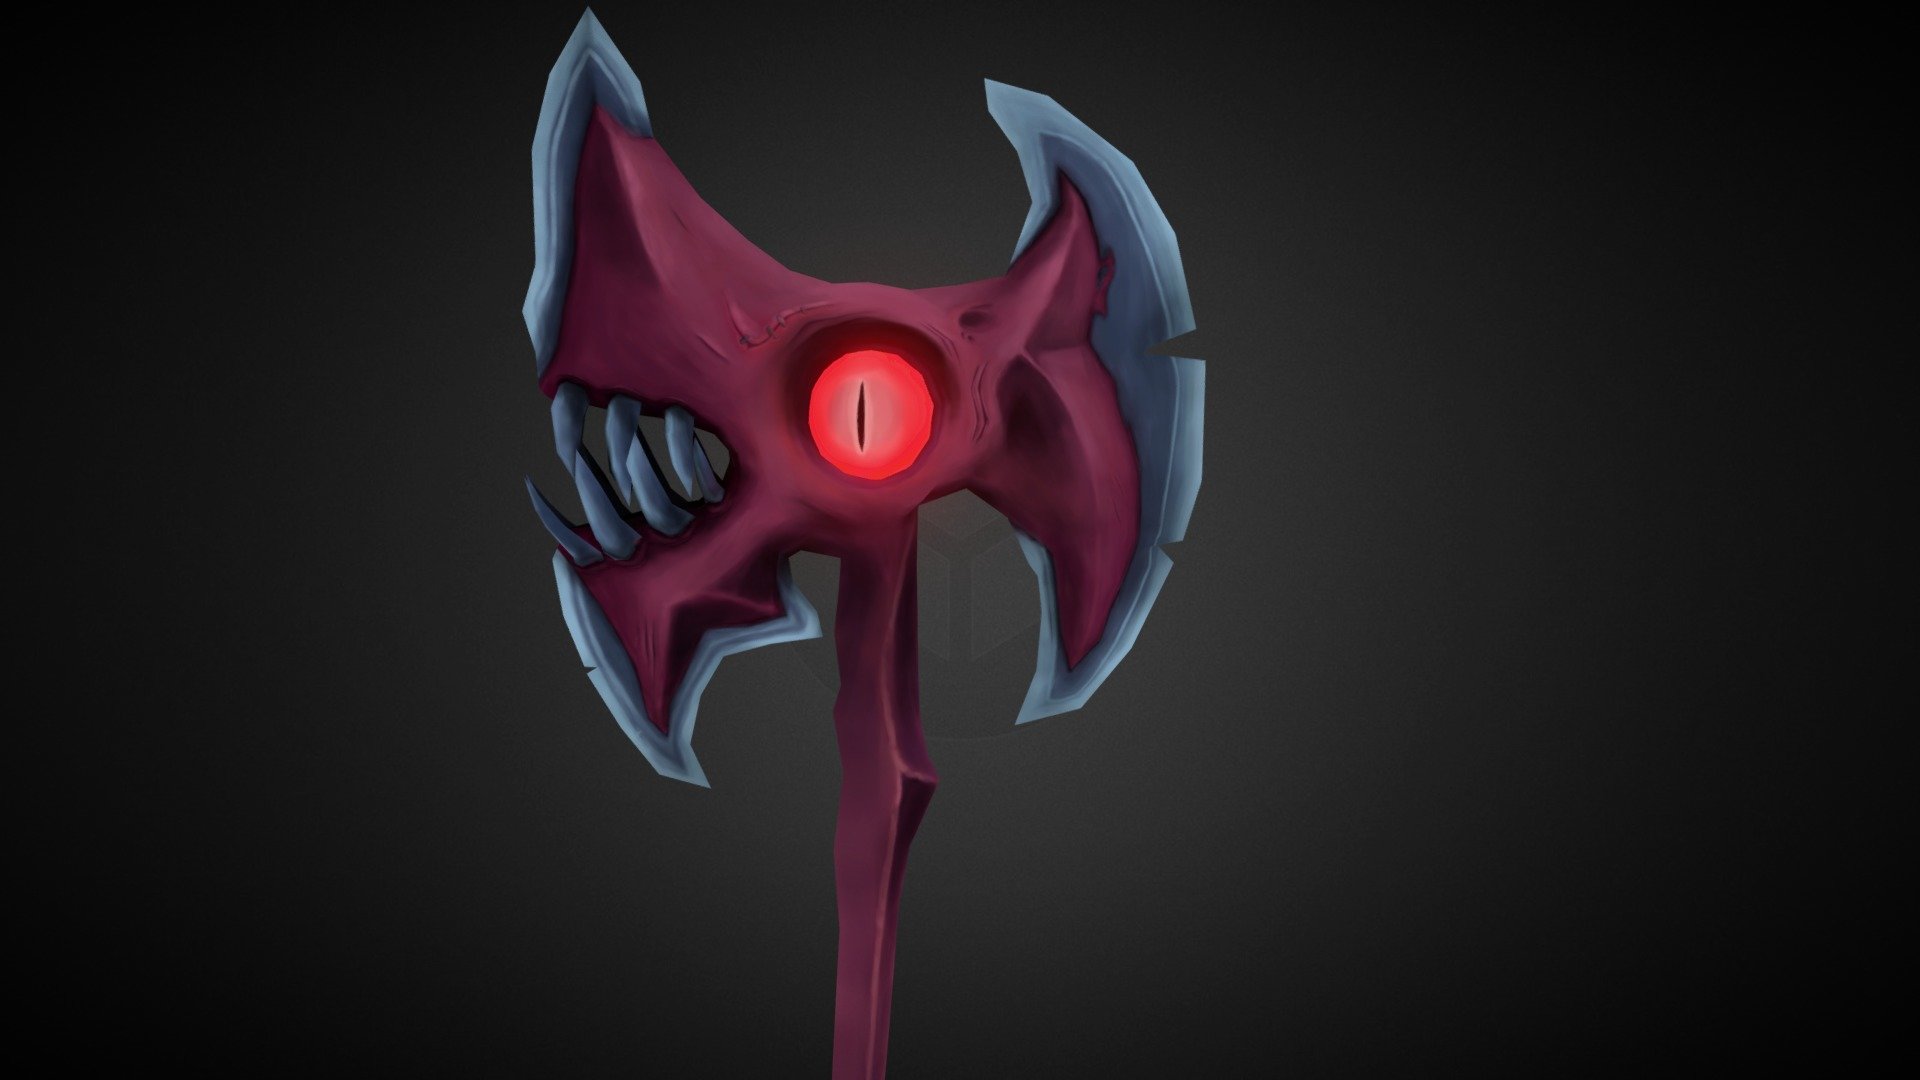 What is Rhaast was inside an axe instead a Scythe? This is my first Handpainted model ever, if you are good in this, please leave me some feedback! 
This idea came to my mind while i was playing D&amp;D, where my Warlock character is bind to The Fiend.
With the Pact of the Blade, he can summon a melee weapon with the appearance of his Overlord. After some month of play, Kayn and Rhaast came out as a League of Legends champion. So i found how  my D&amp;D Weapons will be from now.

https://www.artstation.com/artist/zemasu - Rhaast, the Darkin Axe - 3D model by Zemasu 3d model